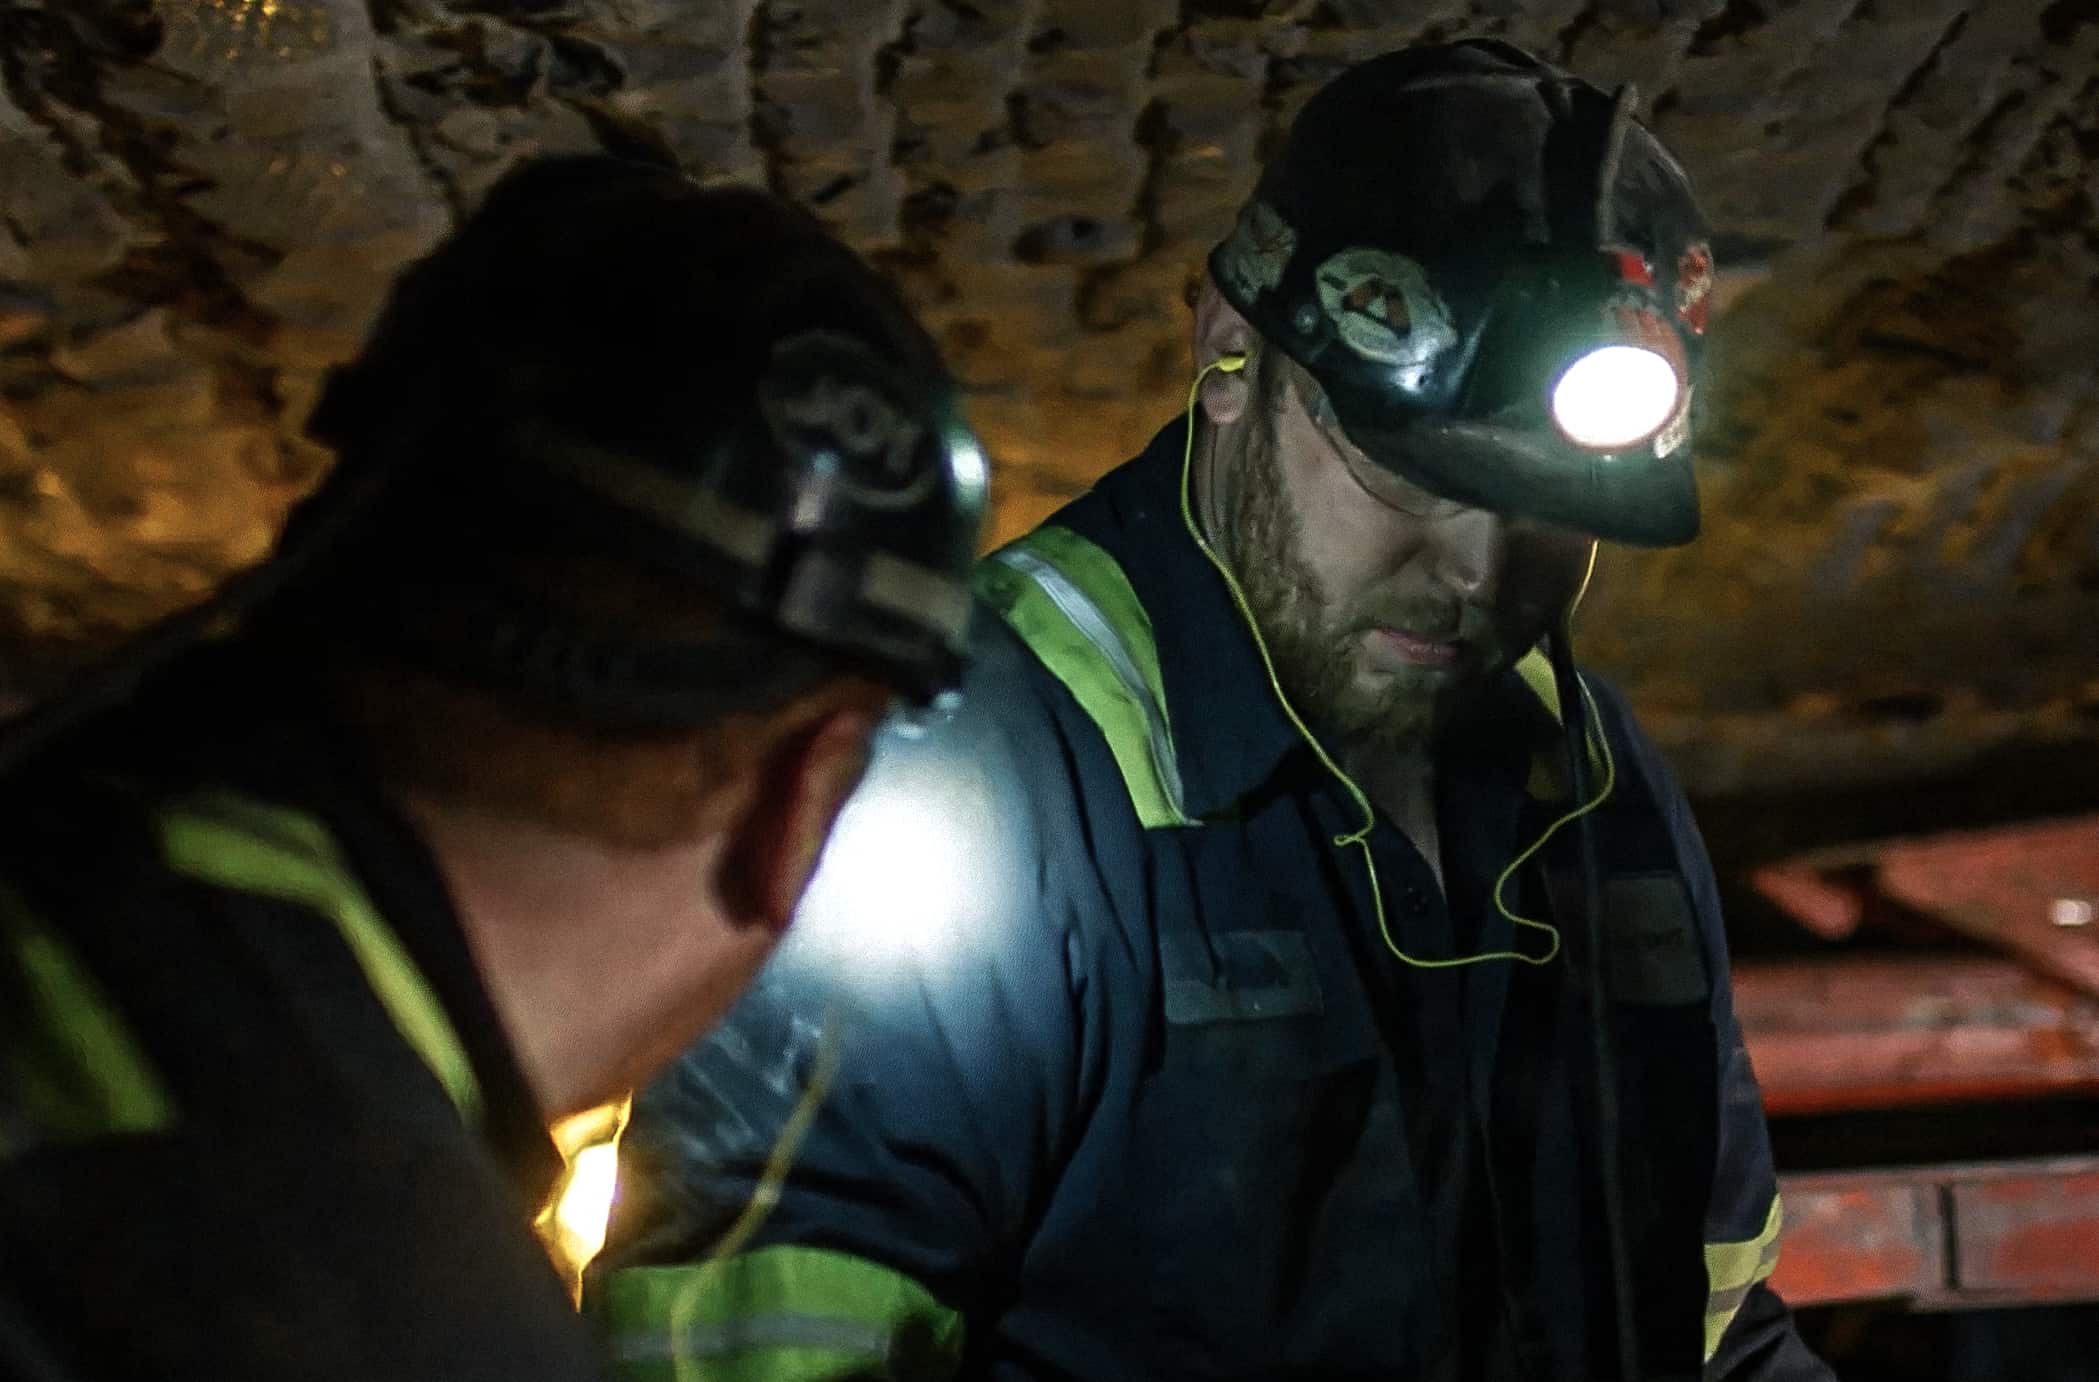 Mine workers examining something in the mine